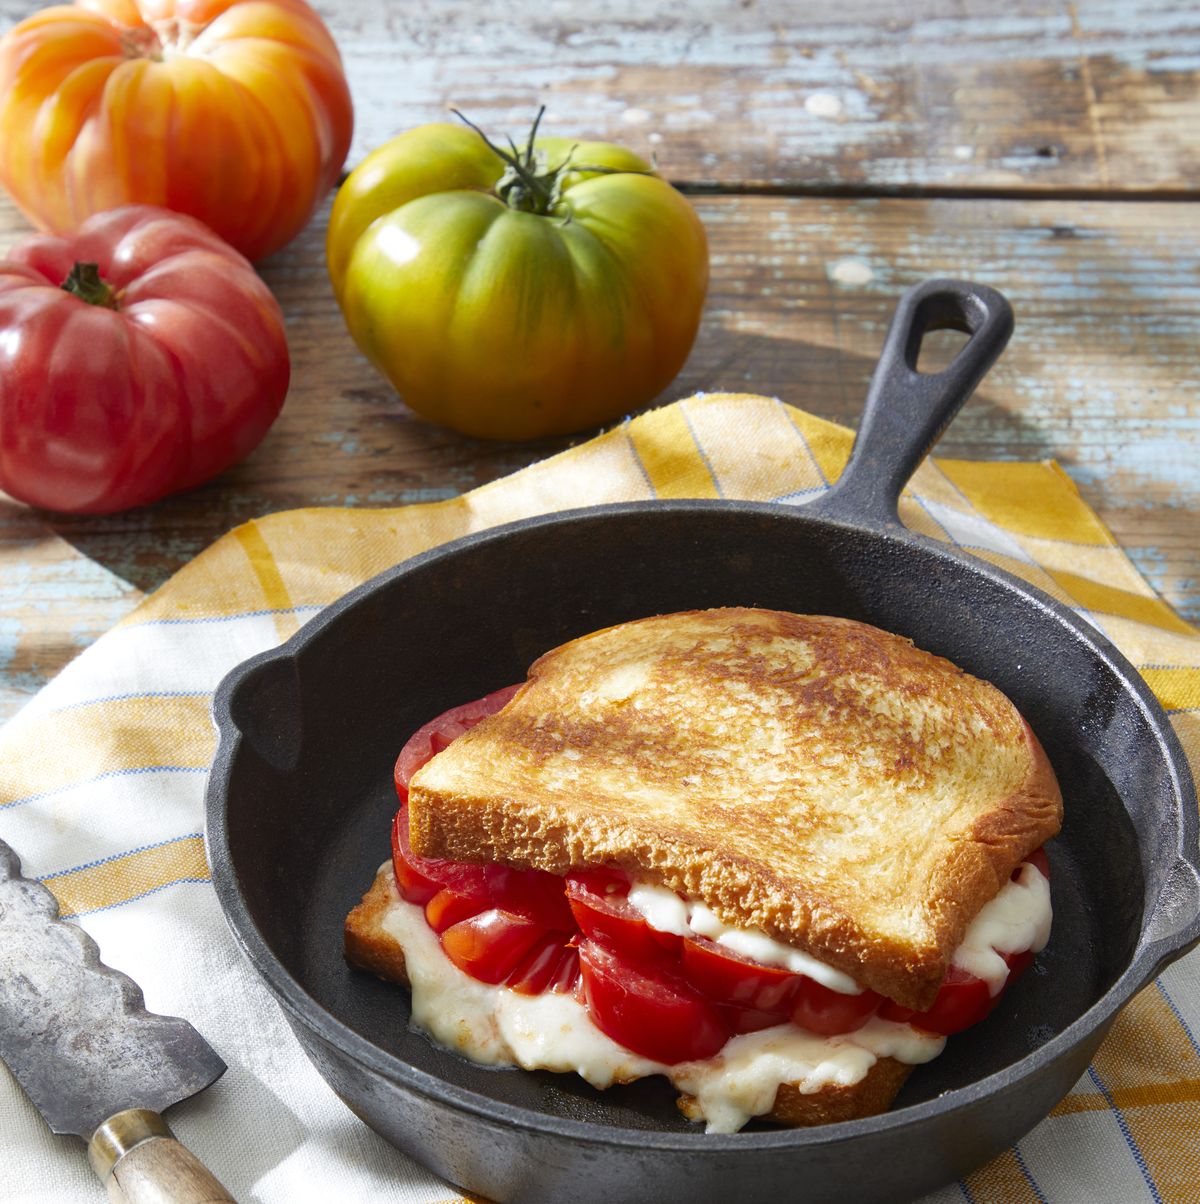 https://hips.hearstapps.com/hmg-prod/images/tomato-and-fontina-grilled-cheese-645004fad9f2a.jpg?crop=1.00xw:0.803xh;0,0.0949xh&resize=1200:*